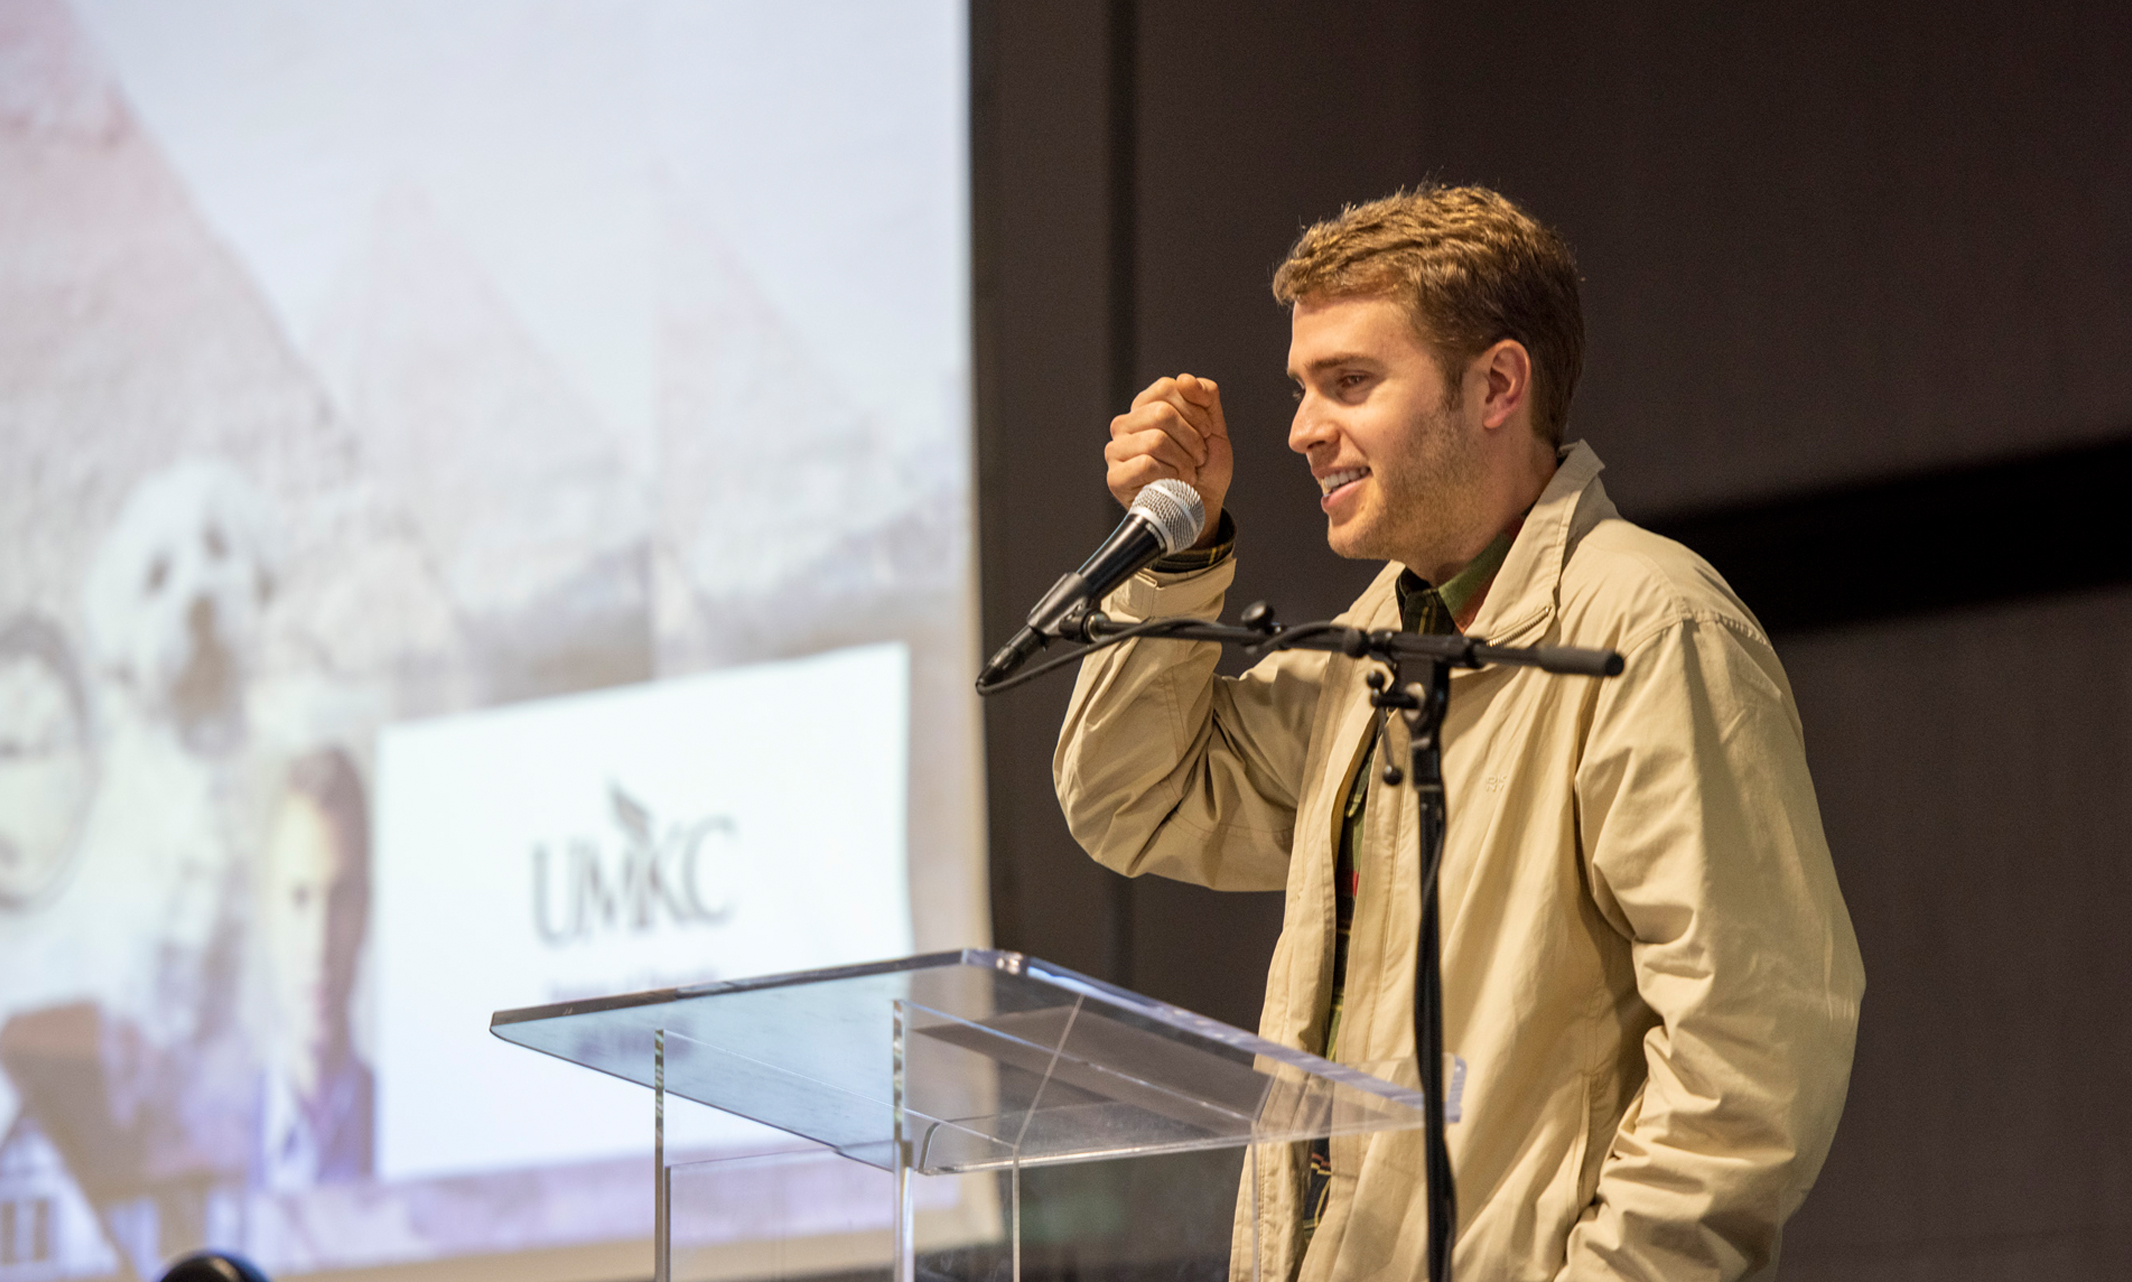 Shane Crone speaks at the 2019 Pride Lecture